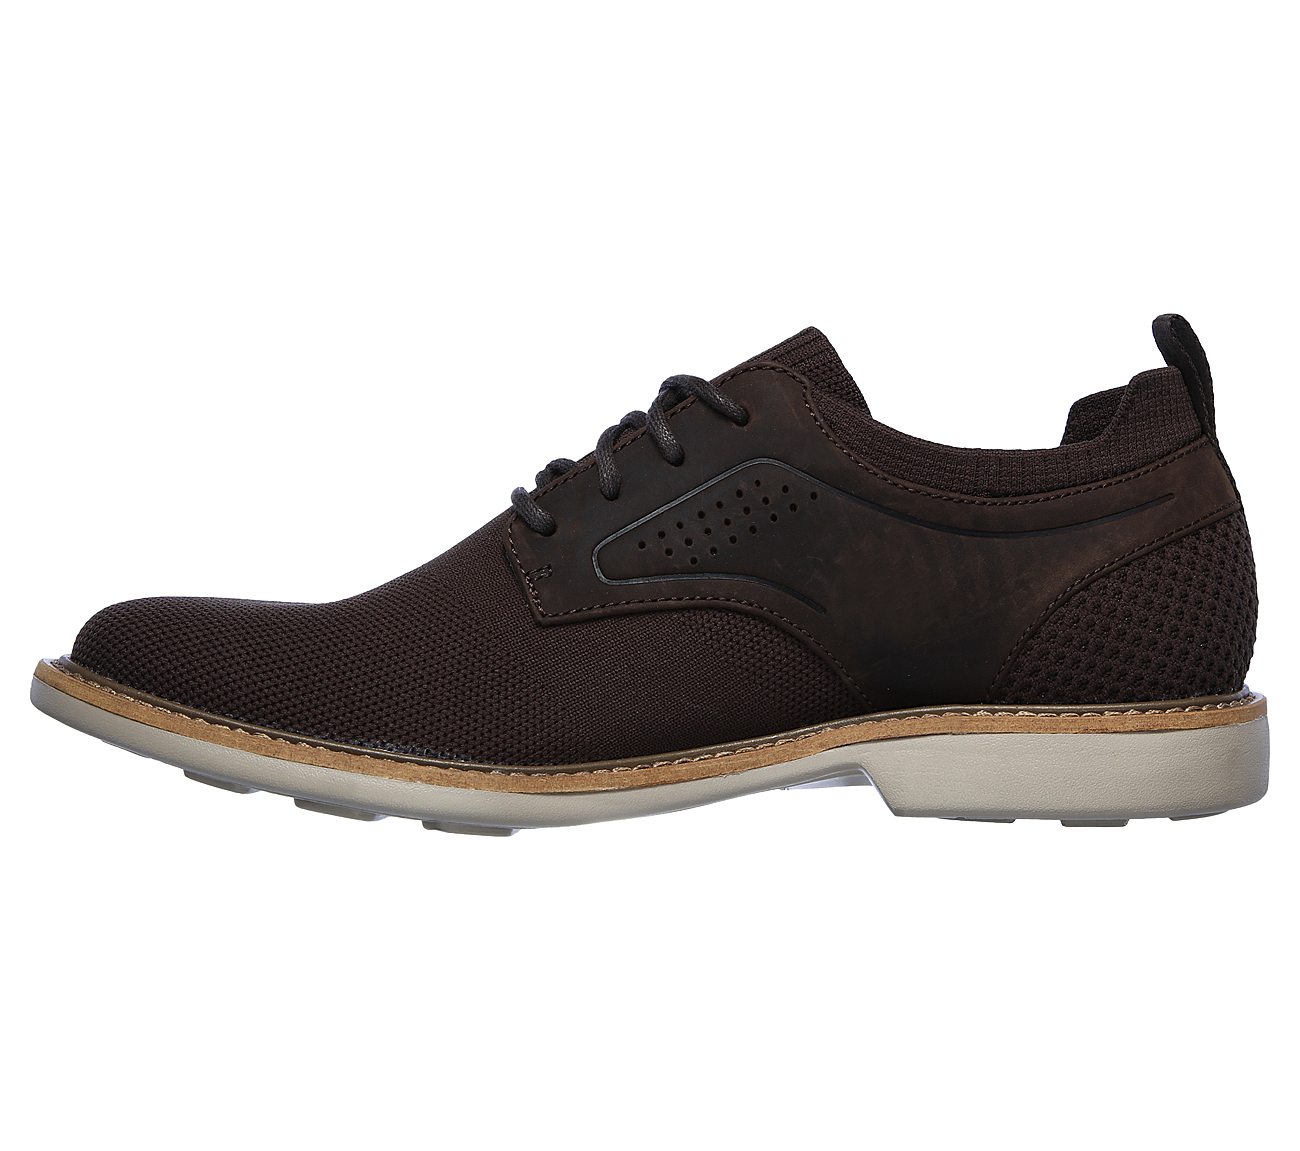 CLUBMAN - WESTSIDE Fabric LACE UP 